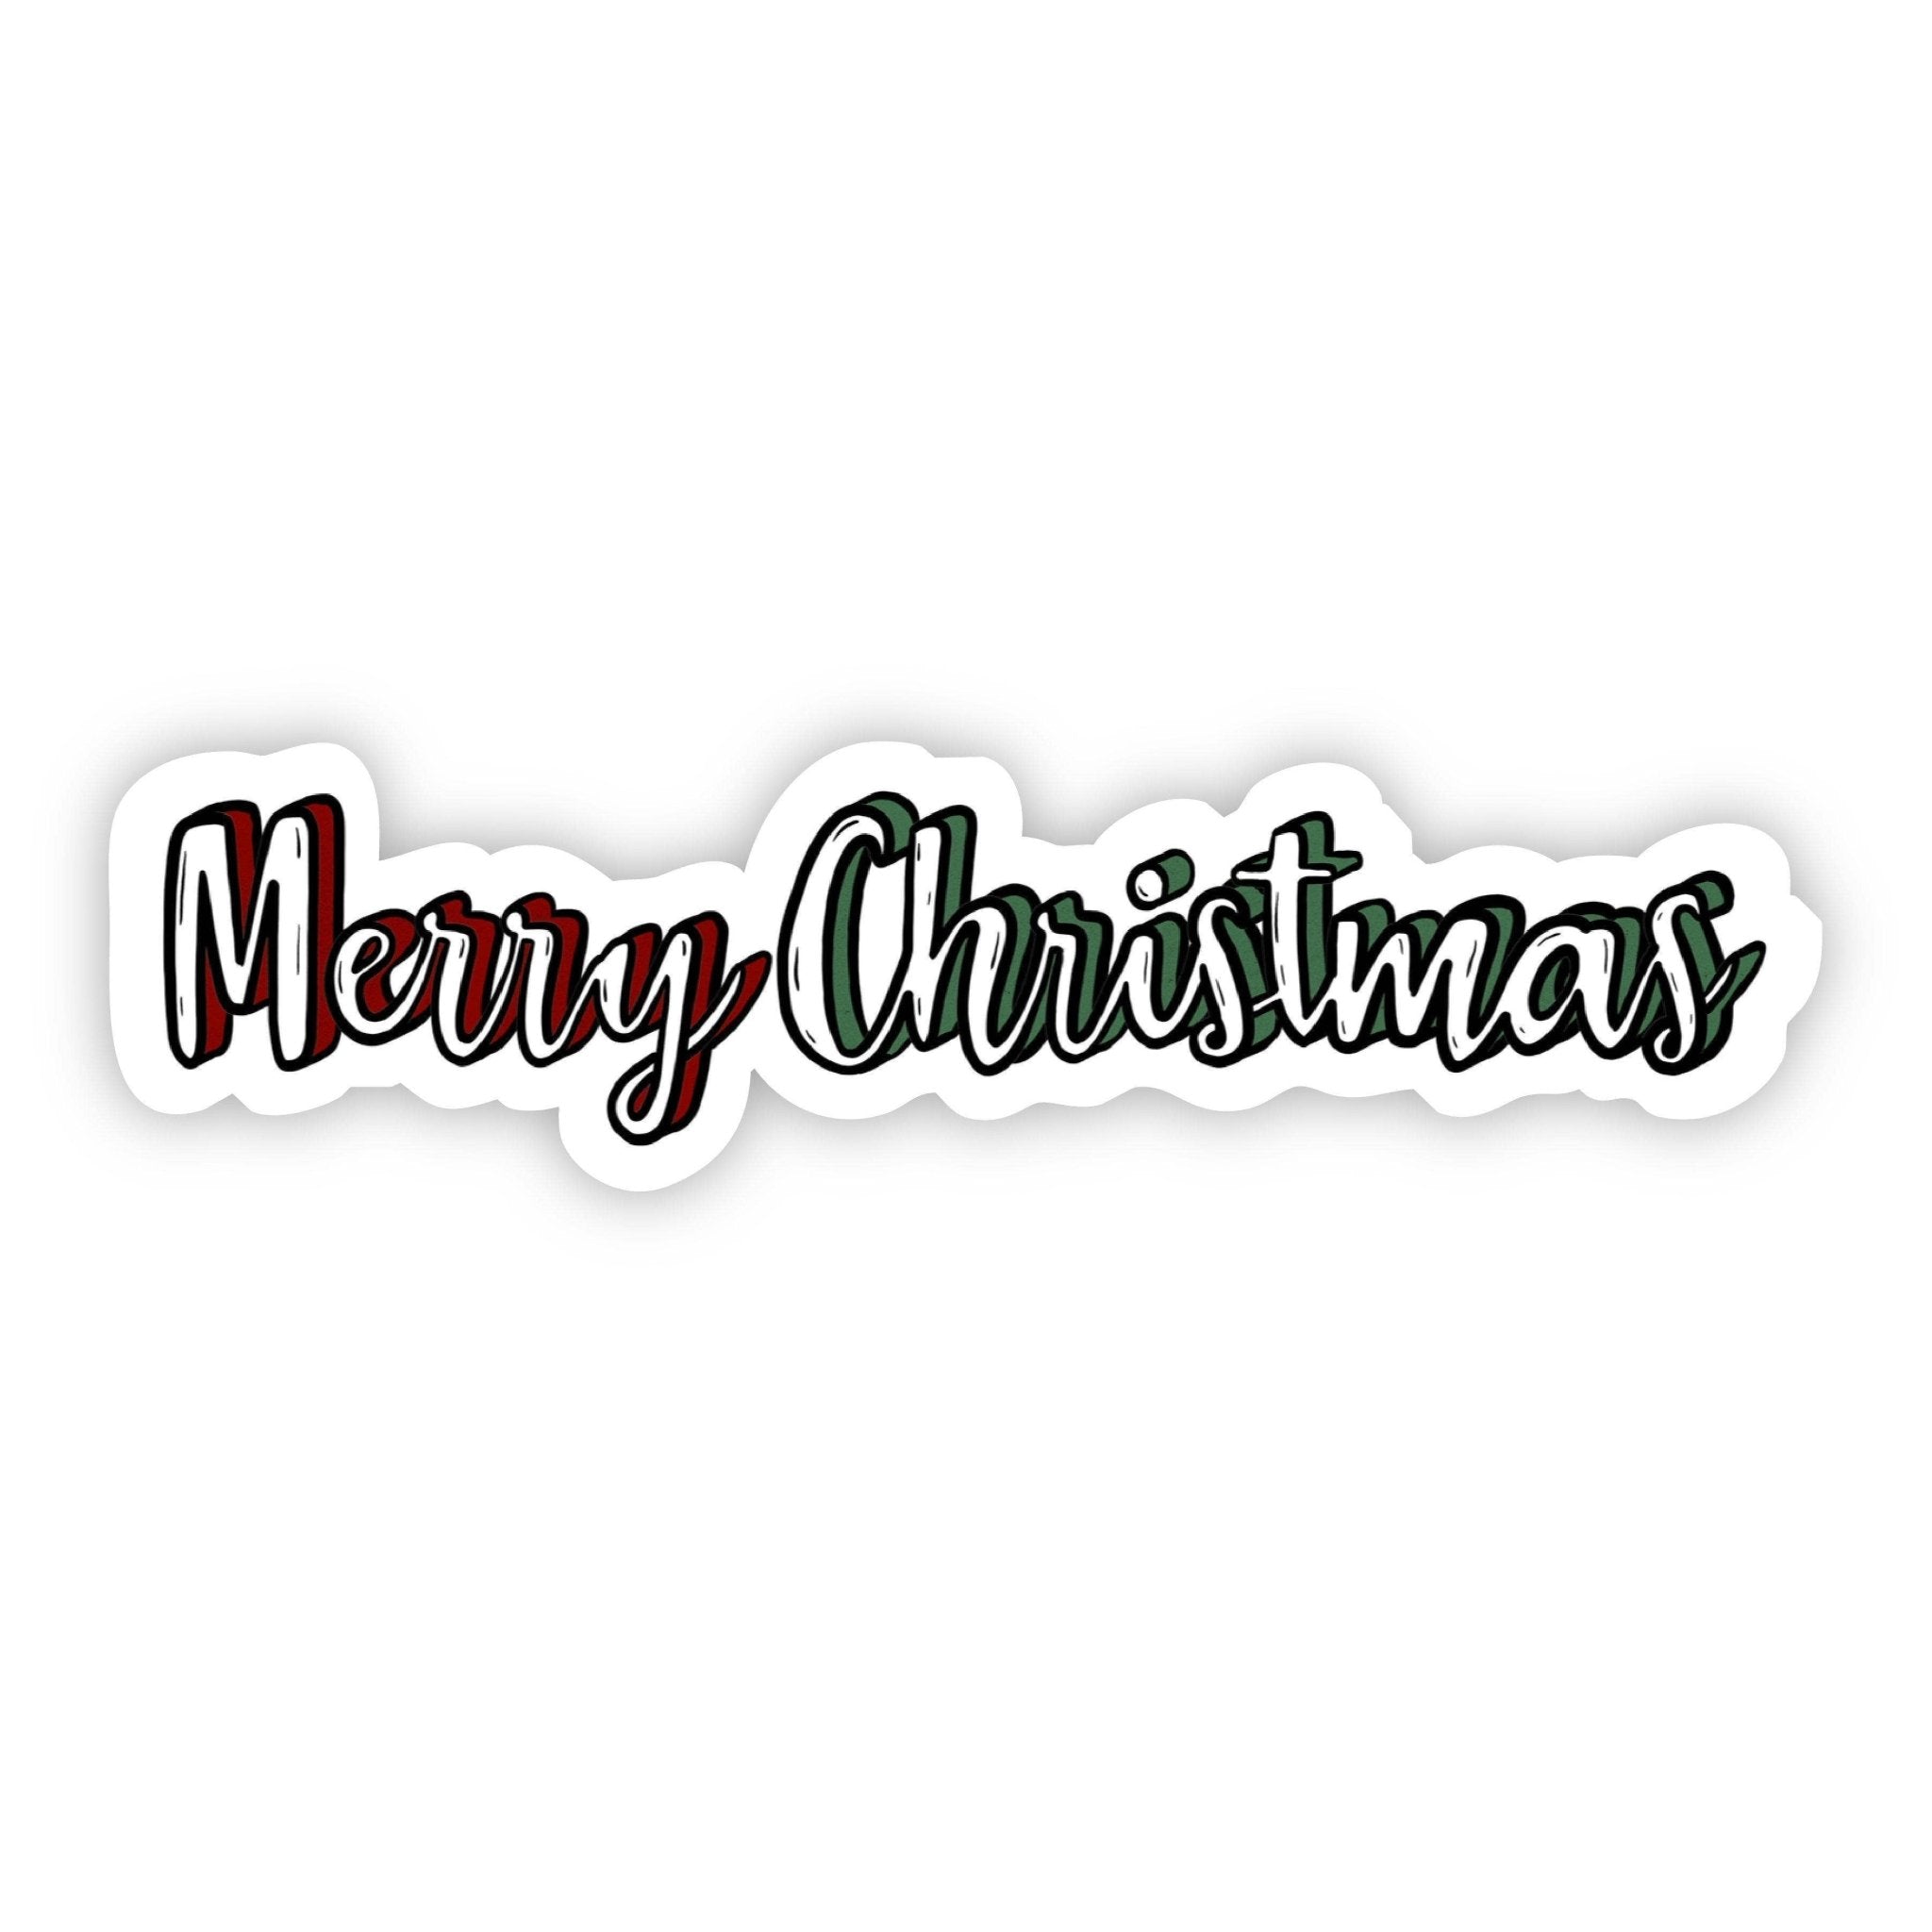 Merry Christmas Lettering Sticker - SuperMom Headquarters